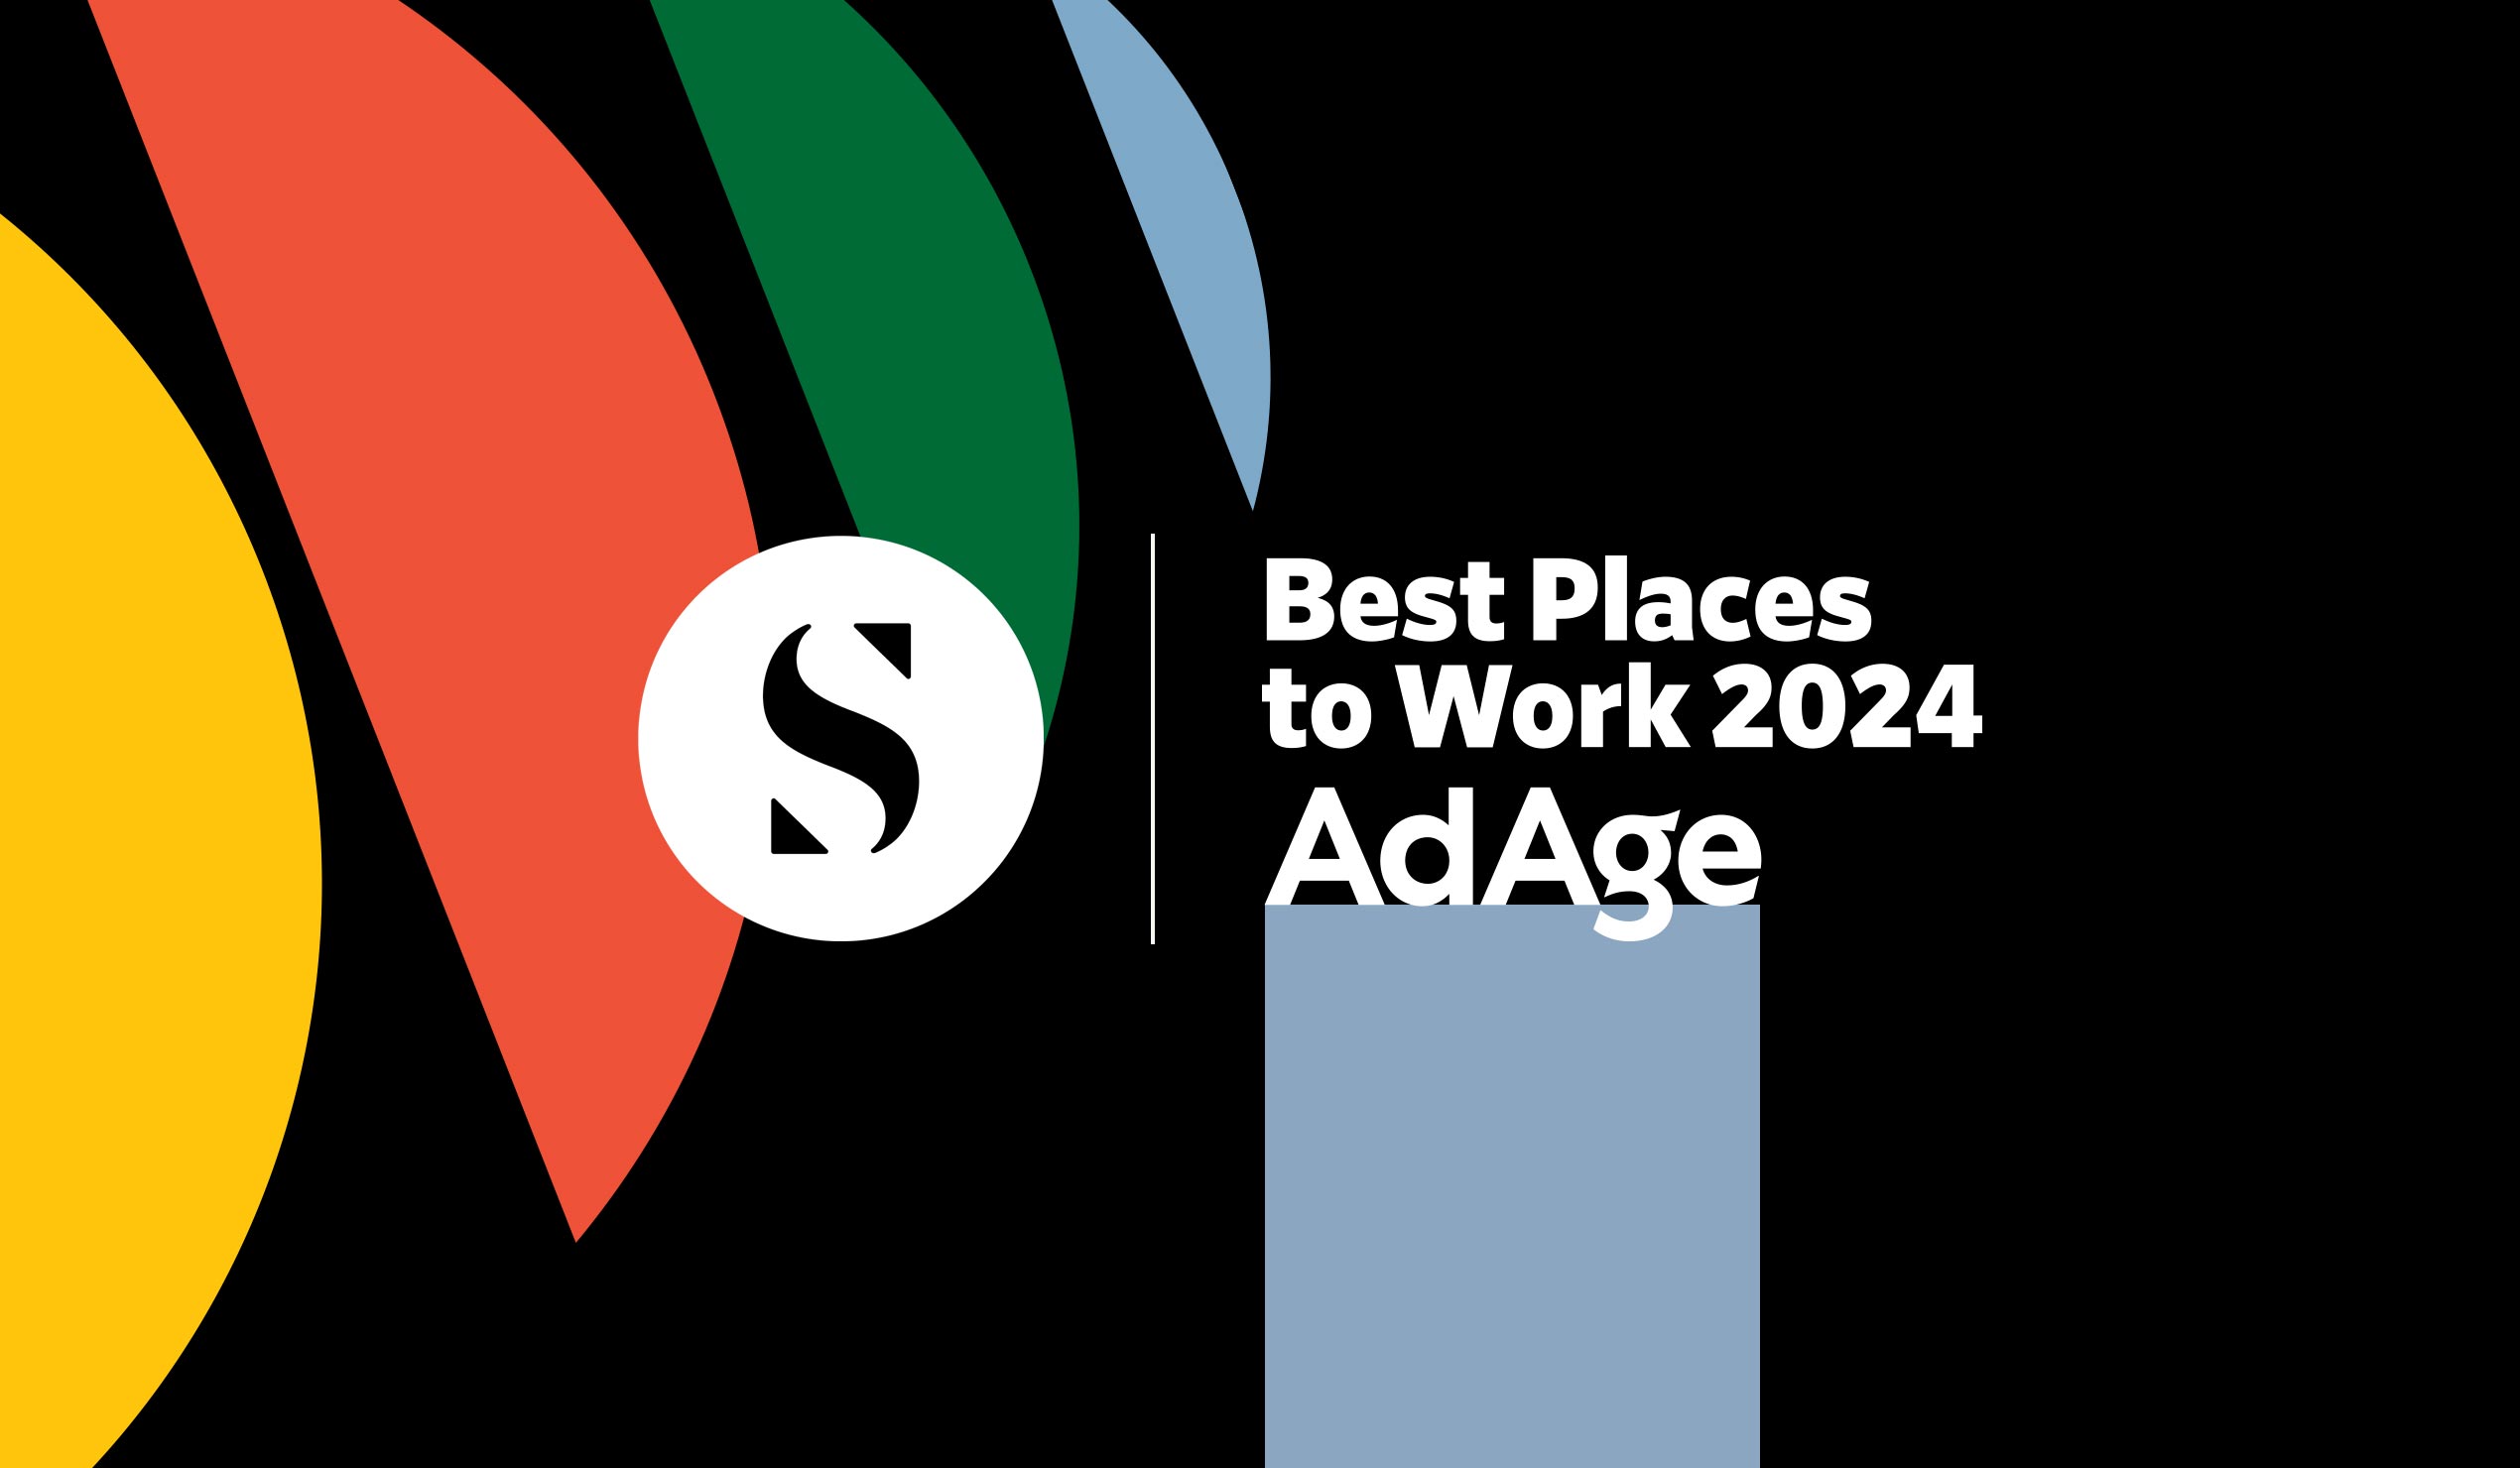 Best Places to work 2024, Ad Age and Signal Theory logo